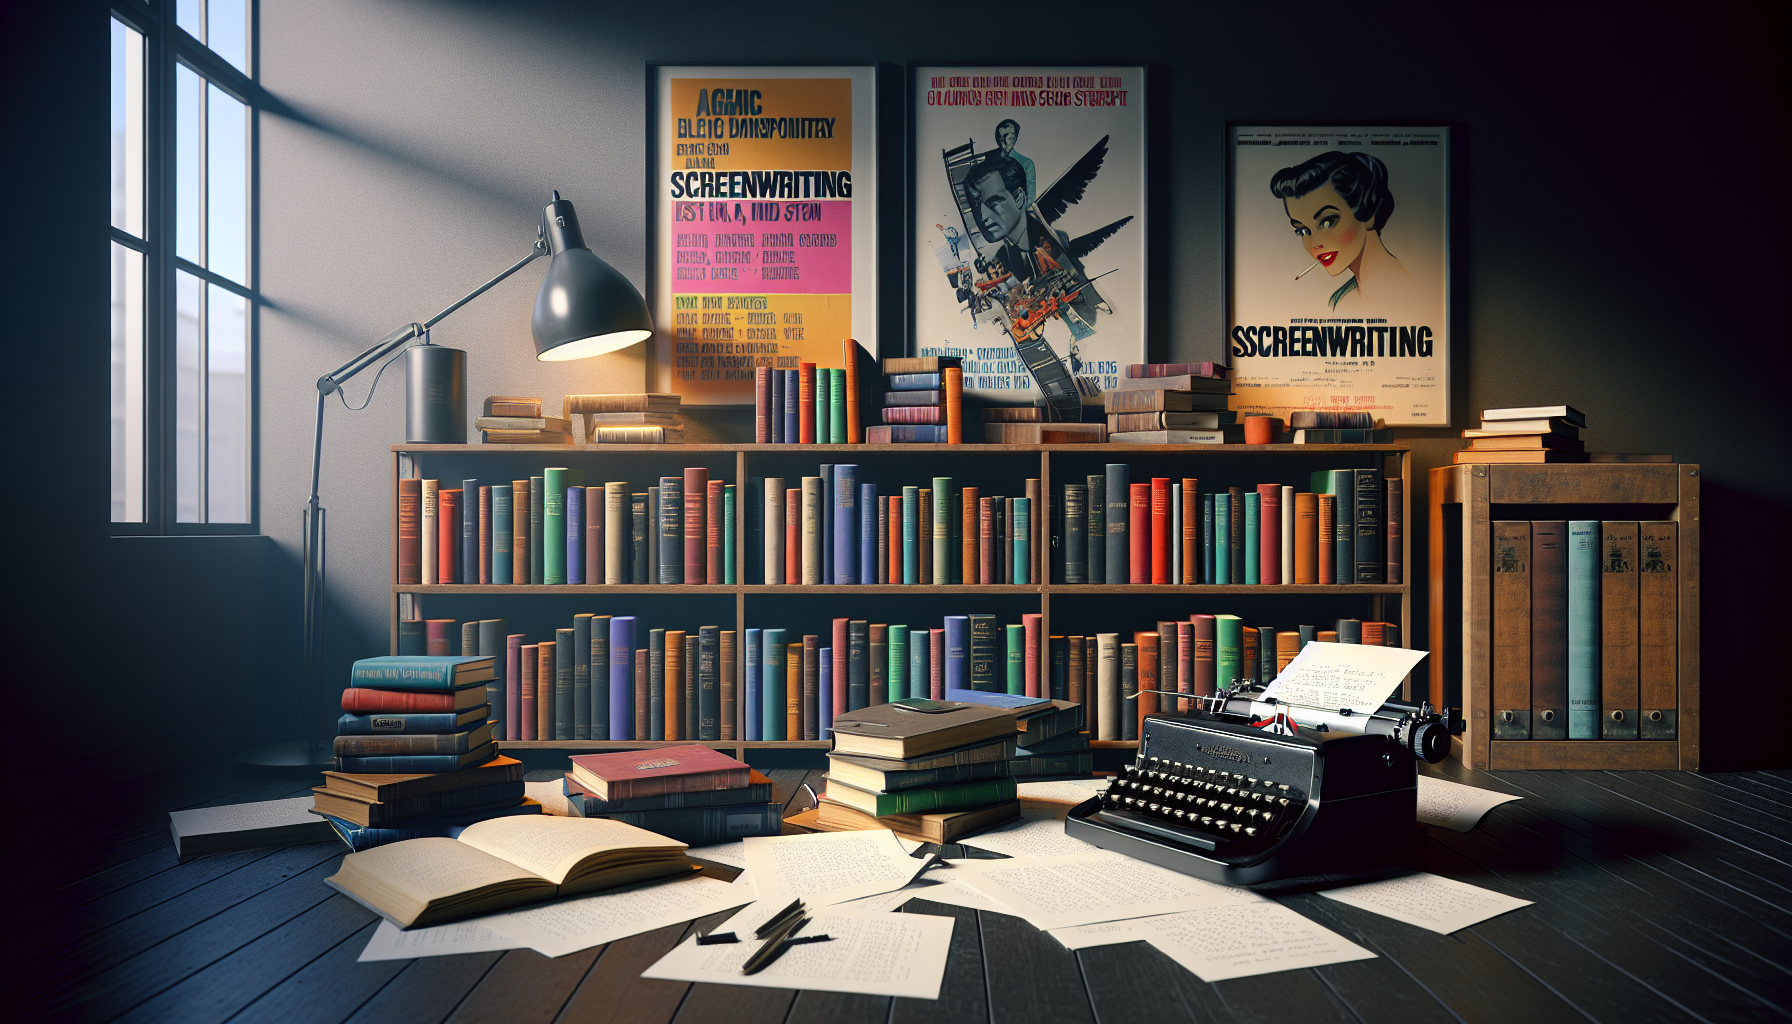 An artistic bookshelf filled with classic and modern screenwriting books, a vintage typewriter and scattered screenplay pages, in a cozy, dimly lit writer's study with posters of famous films on the w